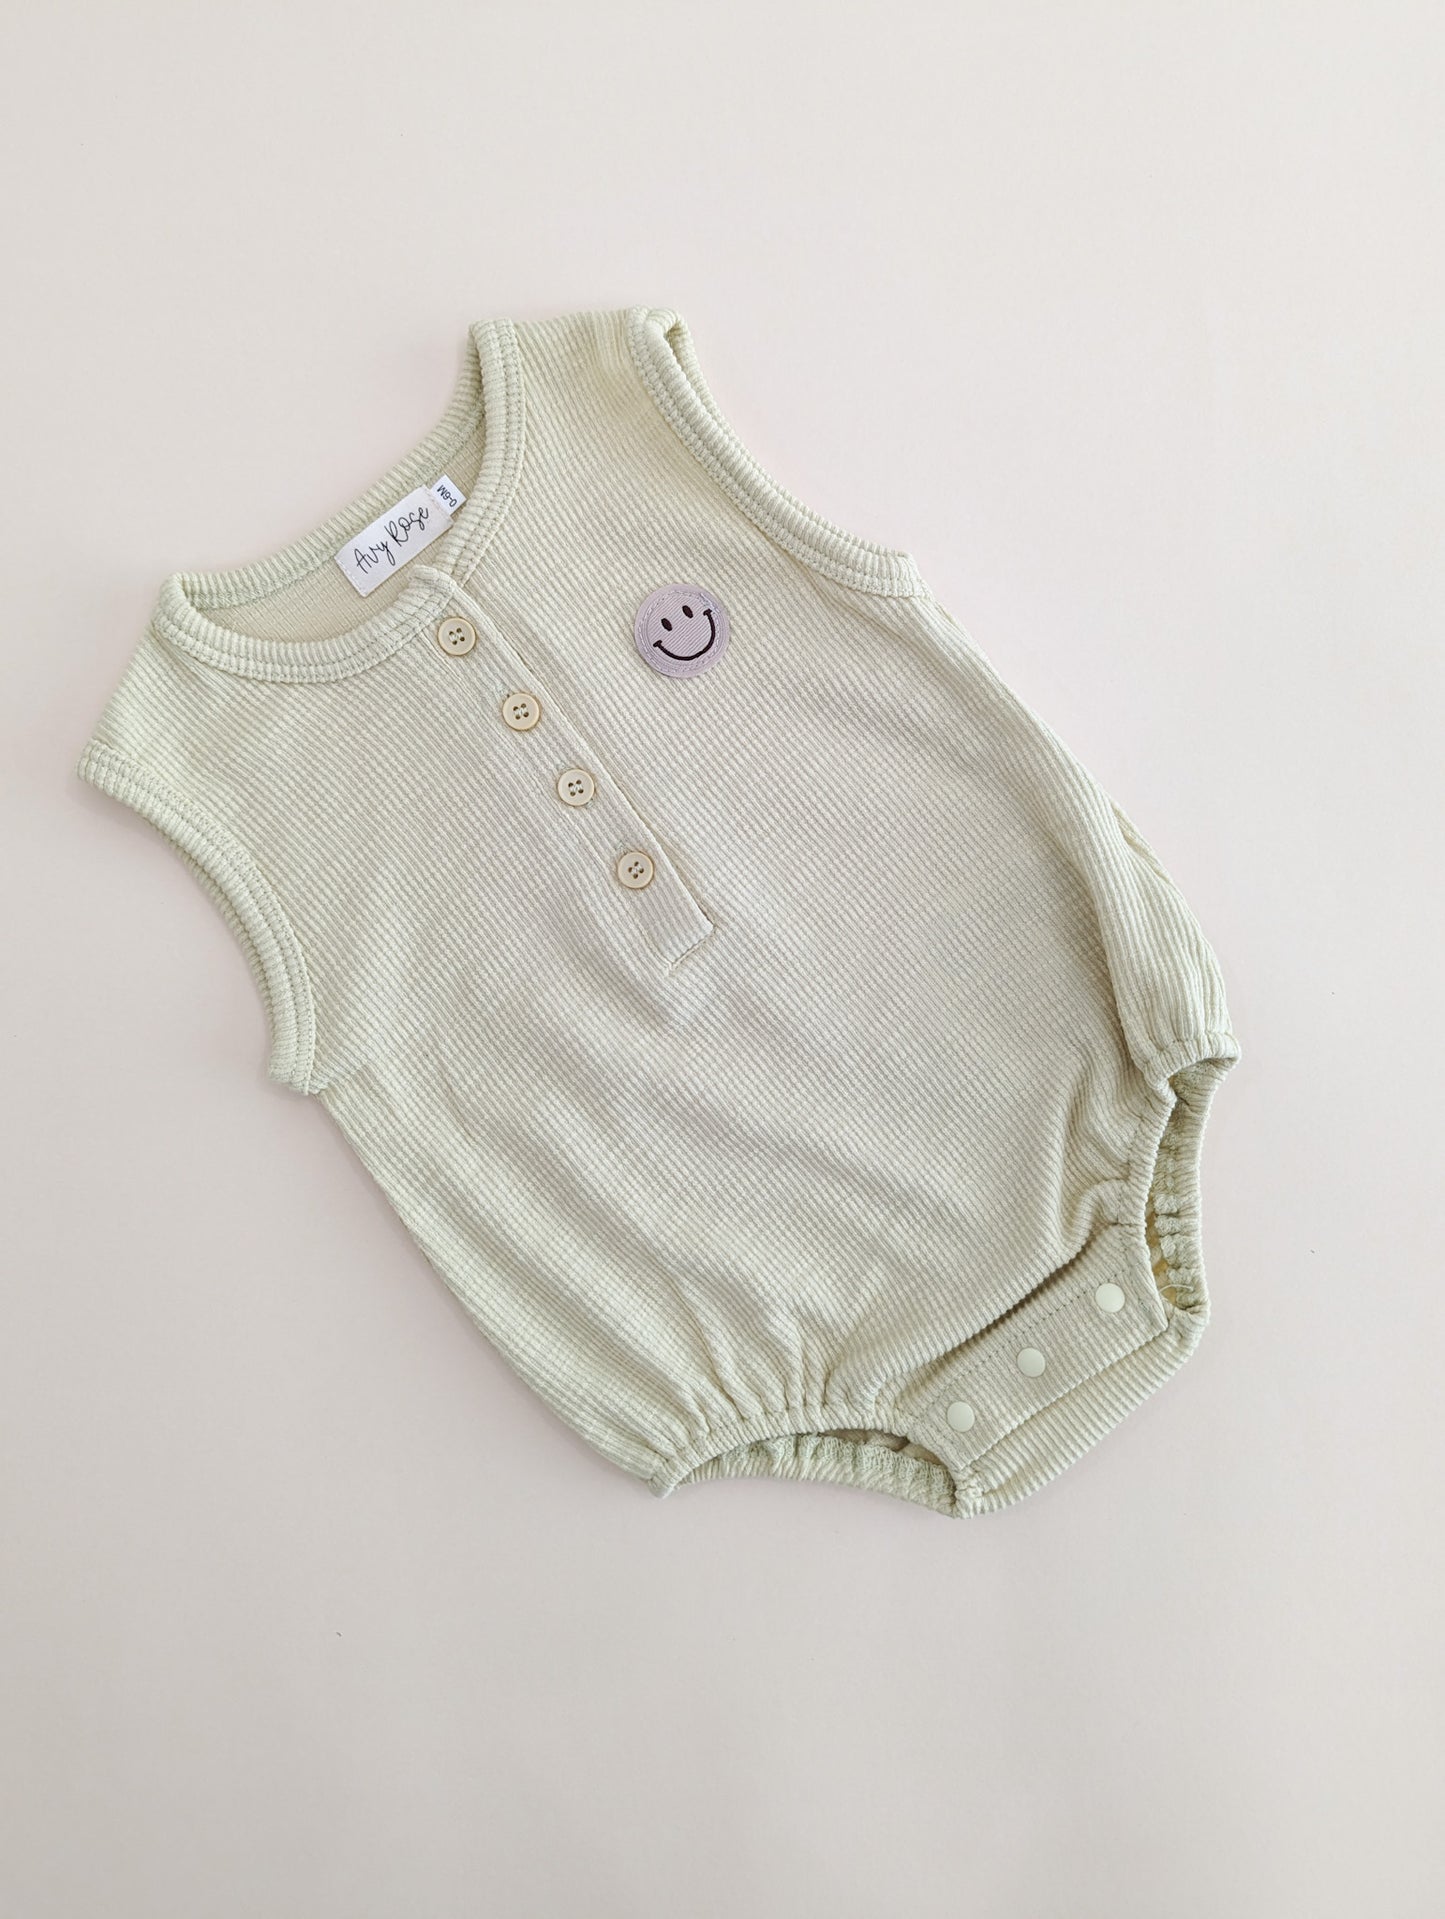 Smiliey face romper